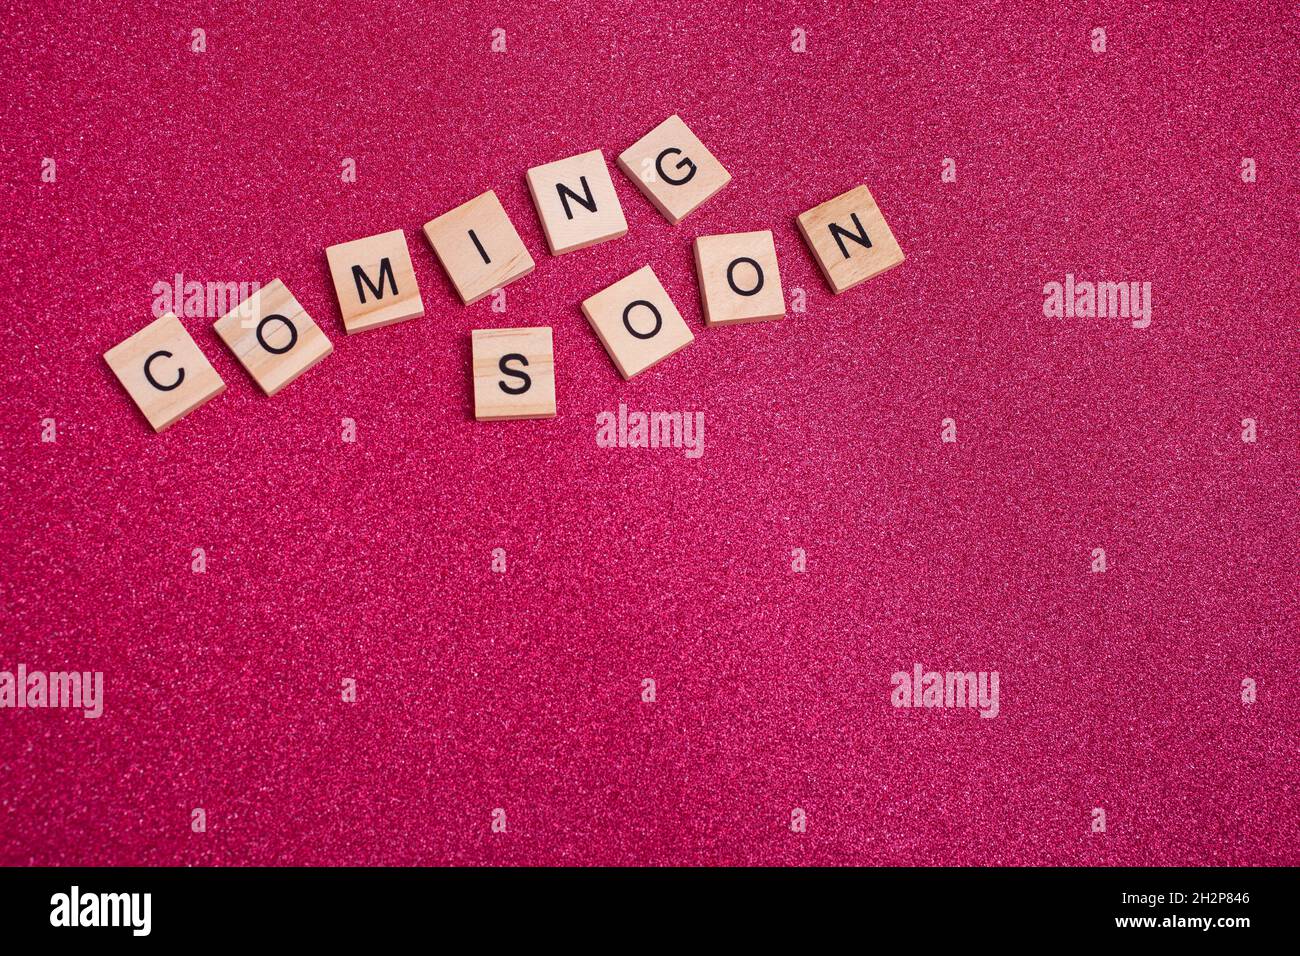 Wooden blocks with text Coming Soon on bright pink background - copyspace Stock Photo